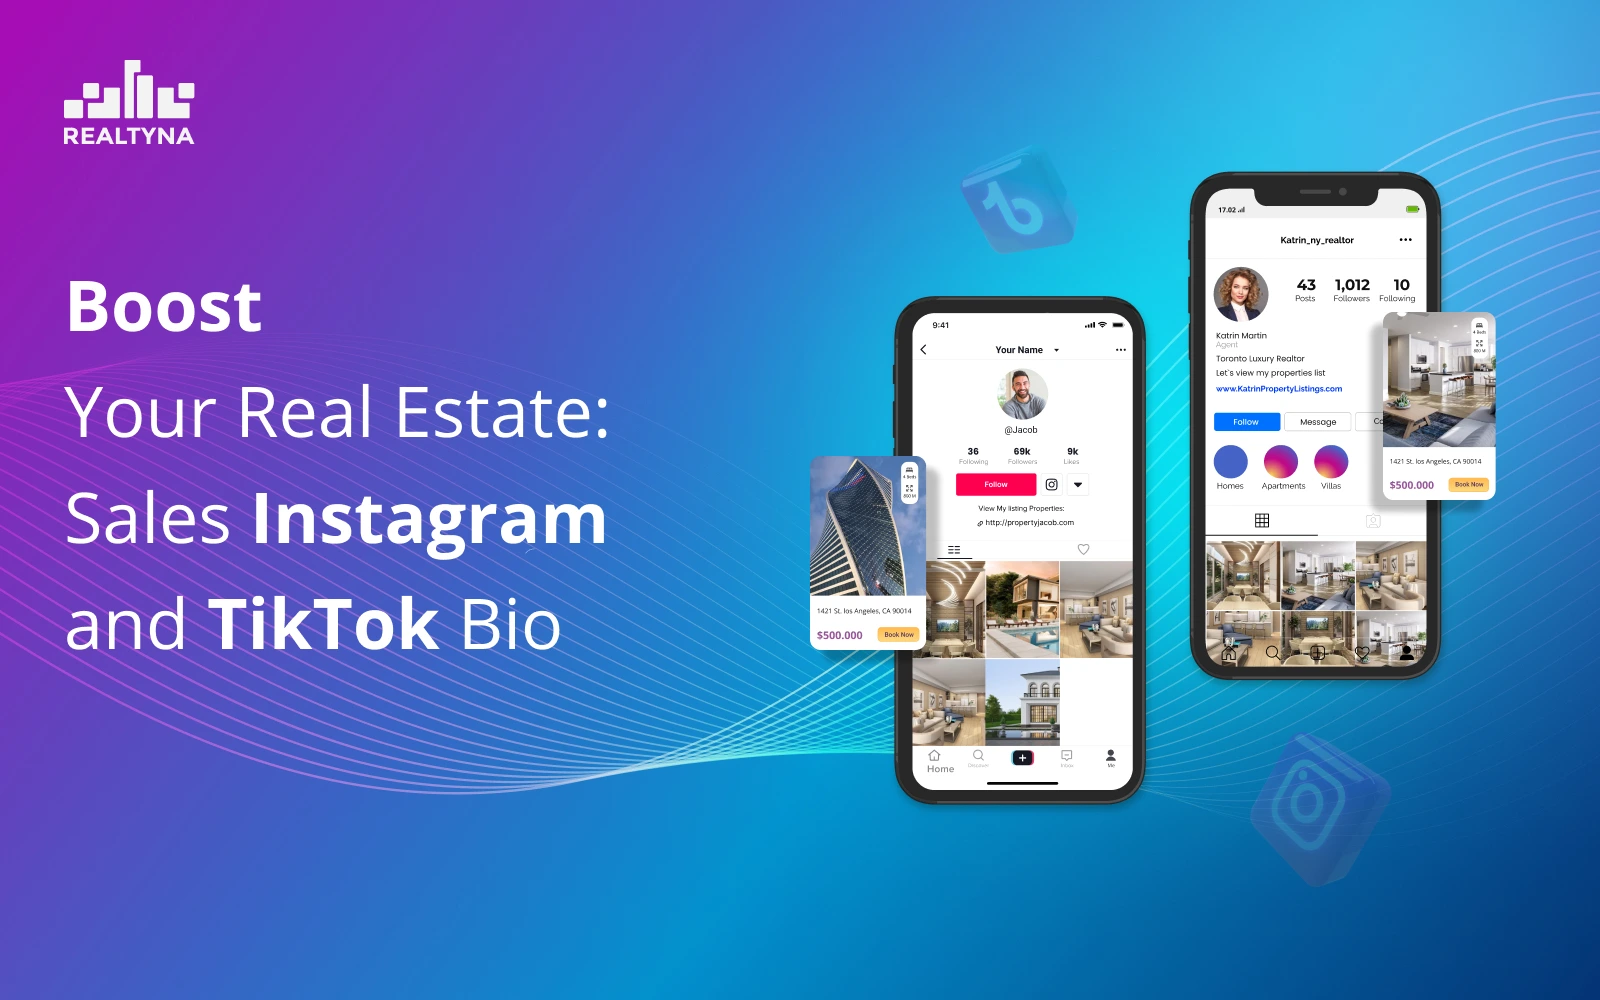 Boost Your Real Estate Sales: Instagram and TikTok Bio